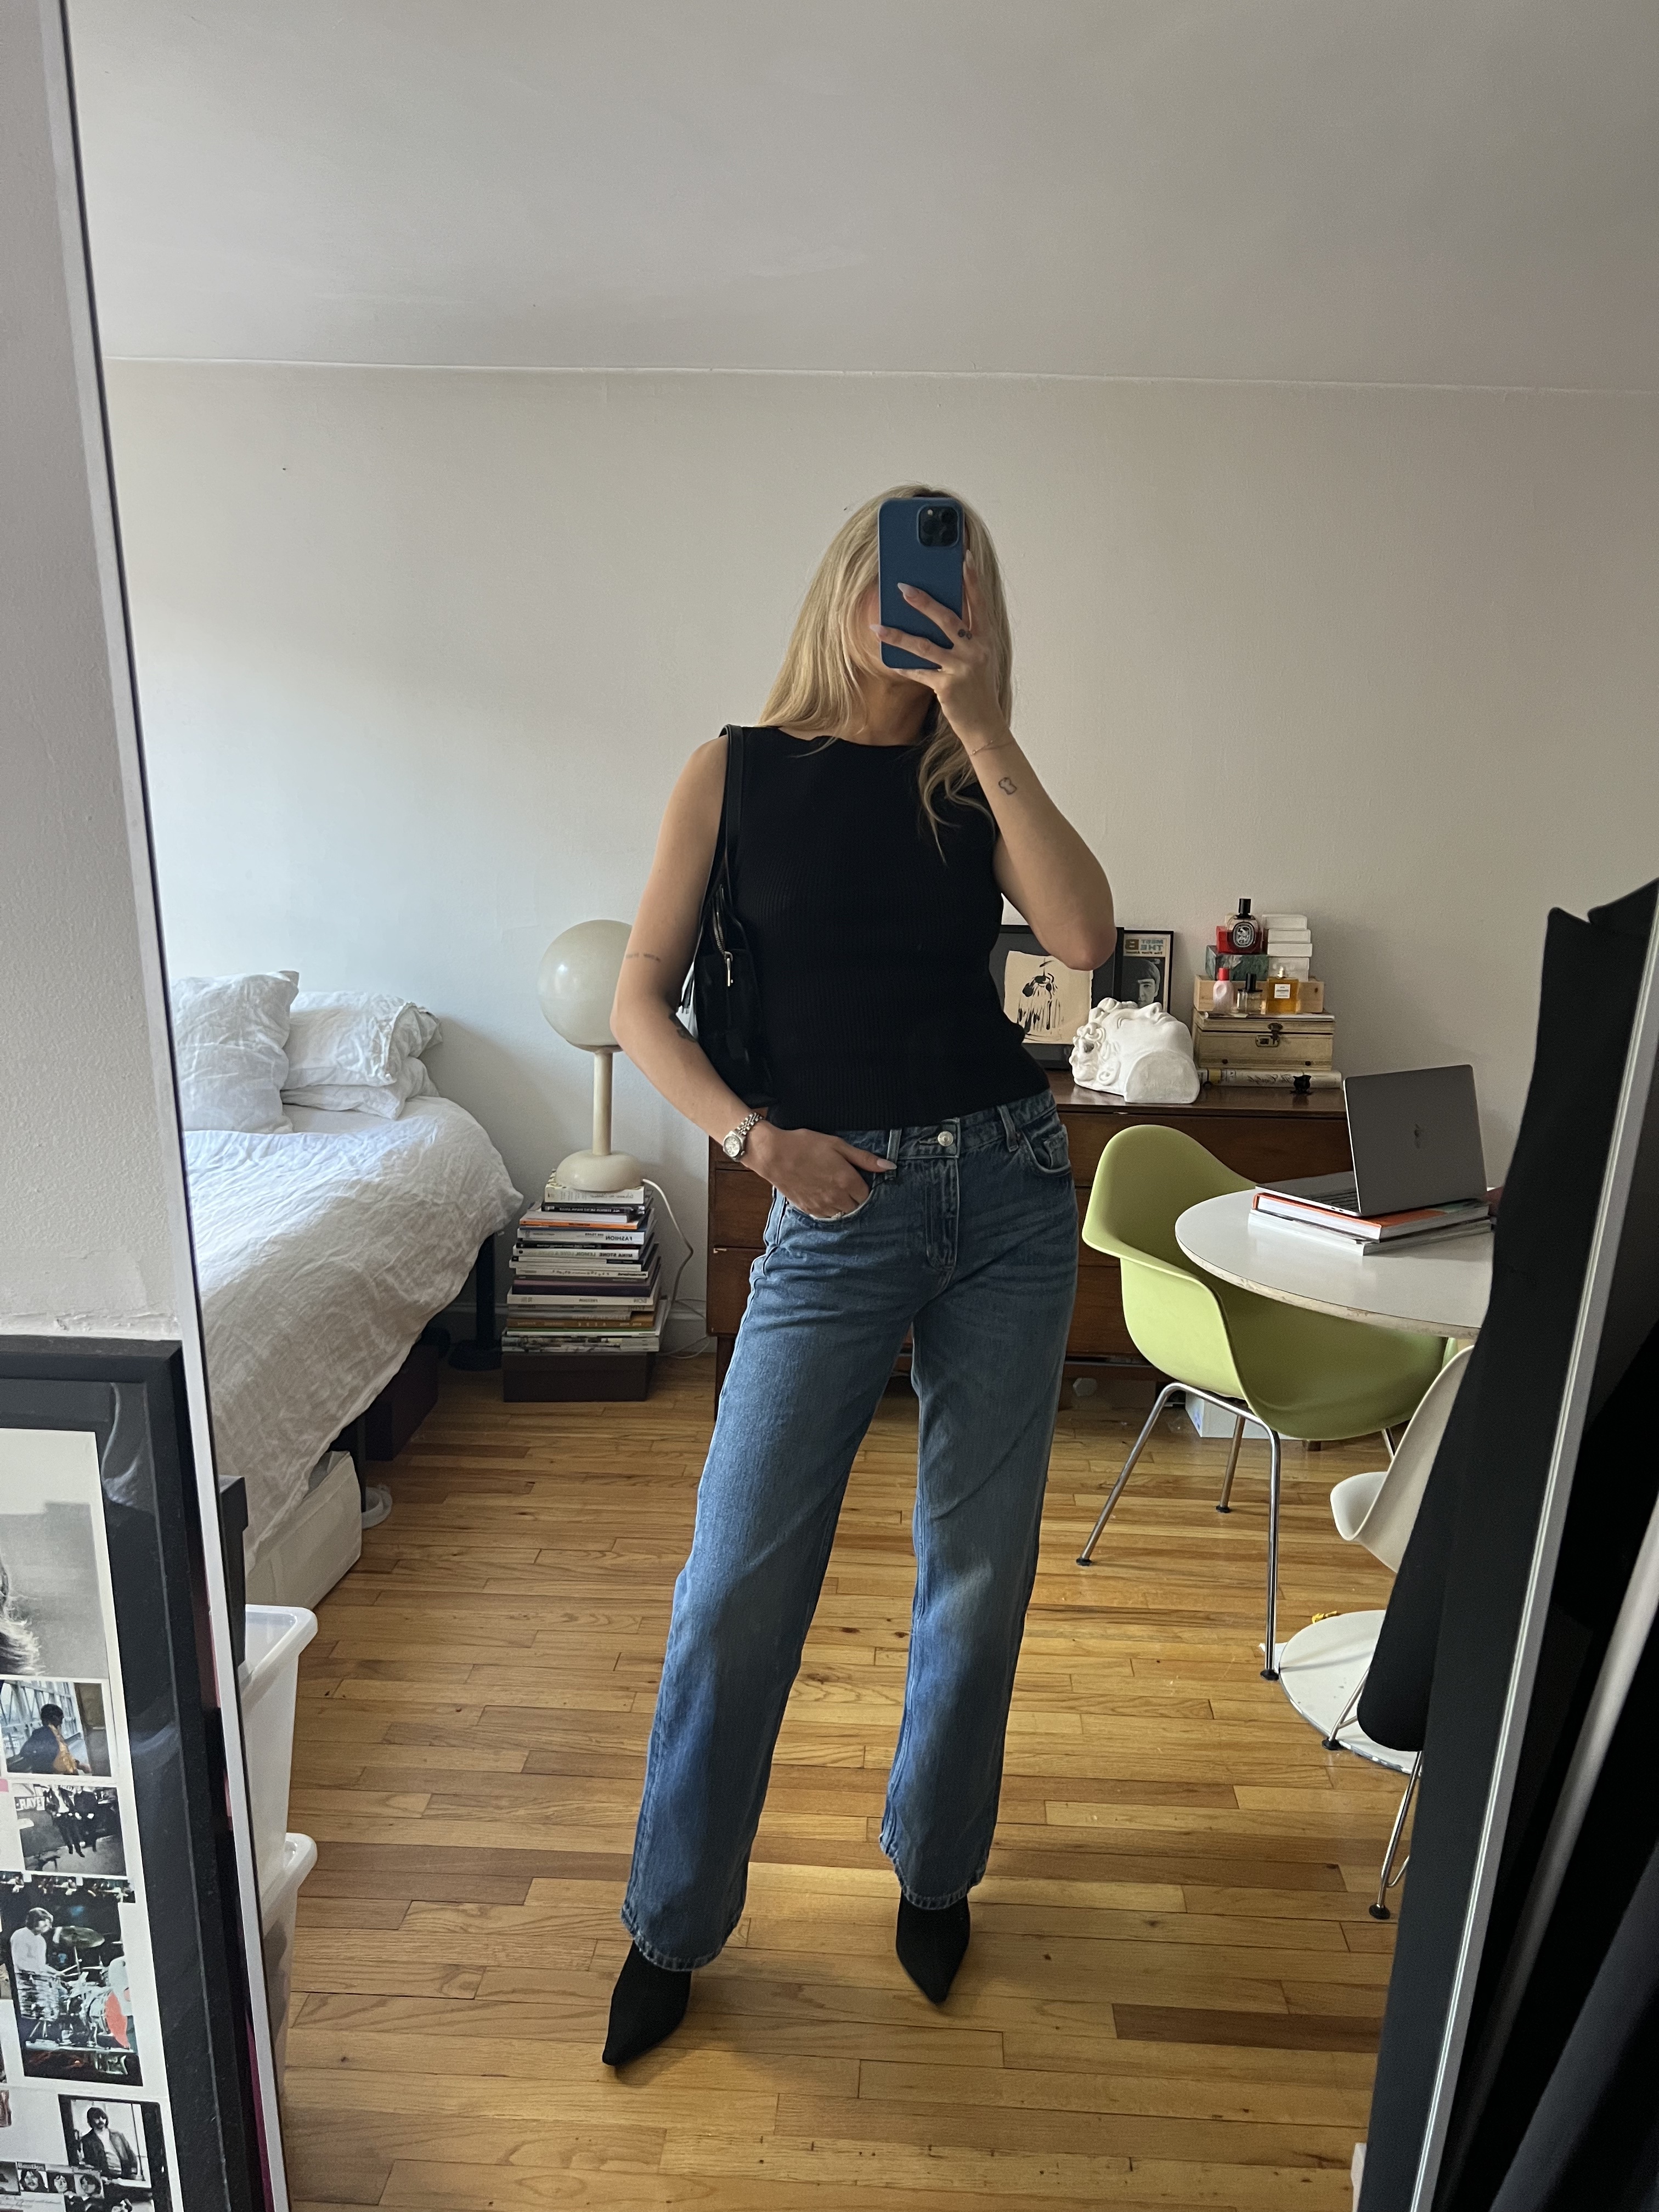 Everything You Should Know Before Buying Zara Jeans | Who What Wear